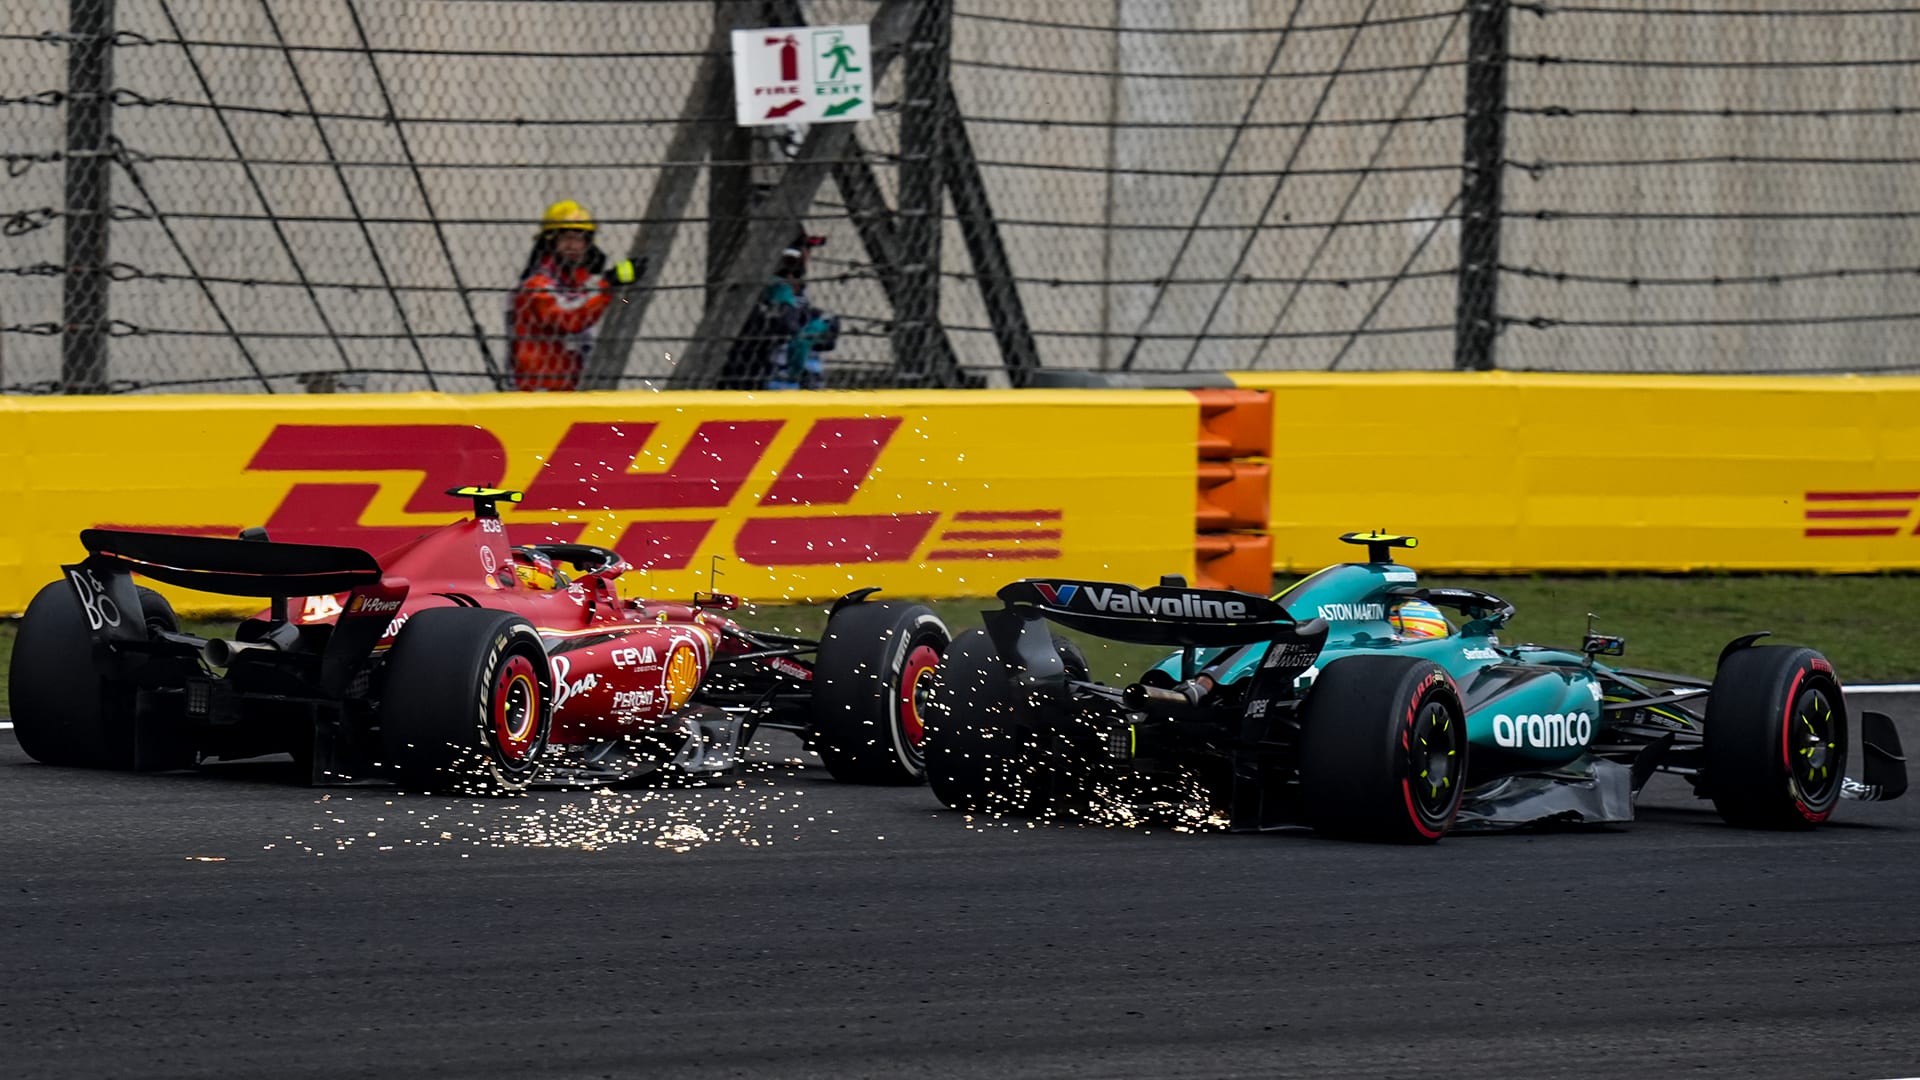 Aston Martin petition for ‘Right of Review’ over Alonso’s penalty following clash with Sainz in China